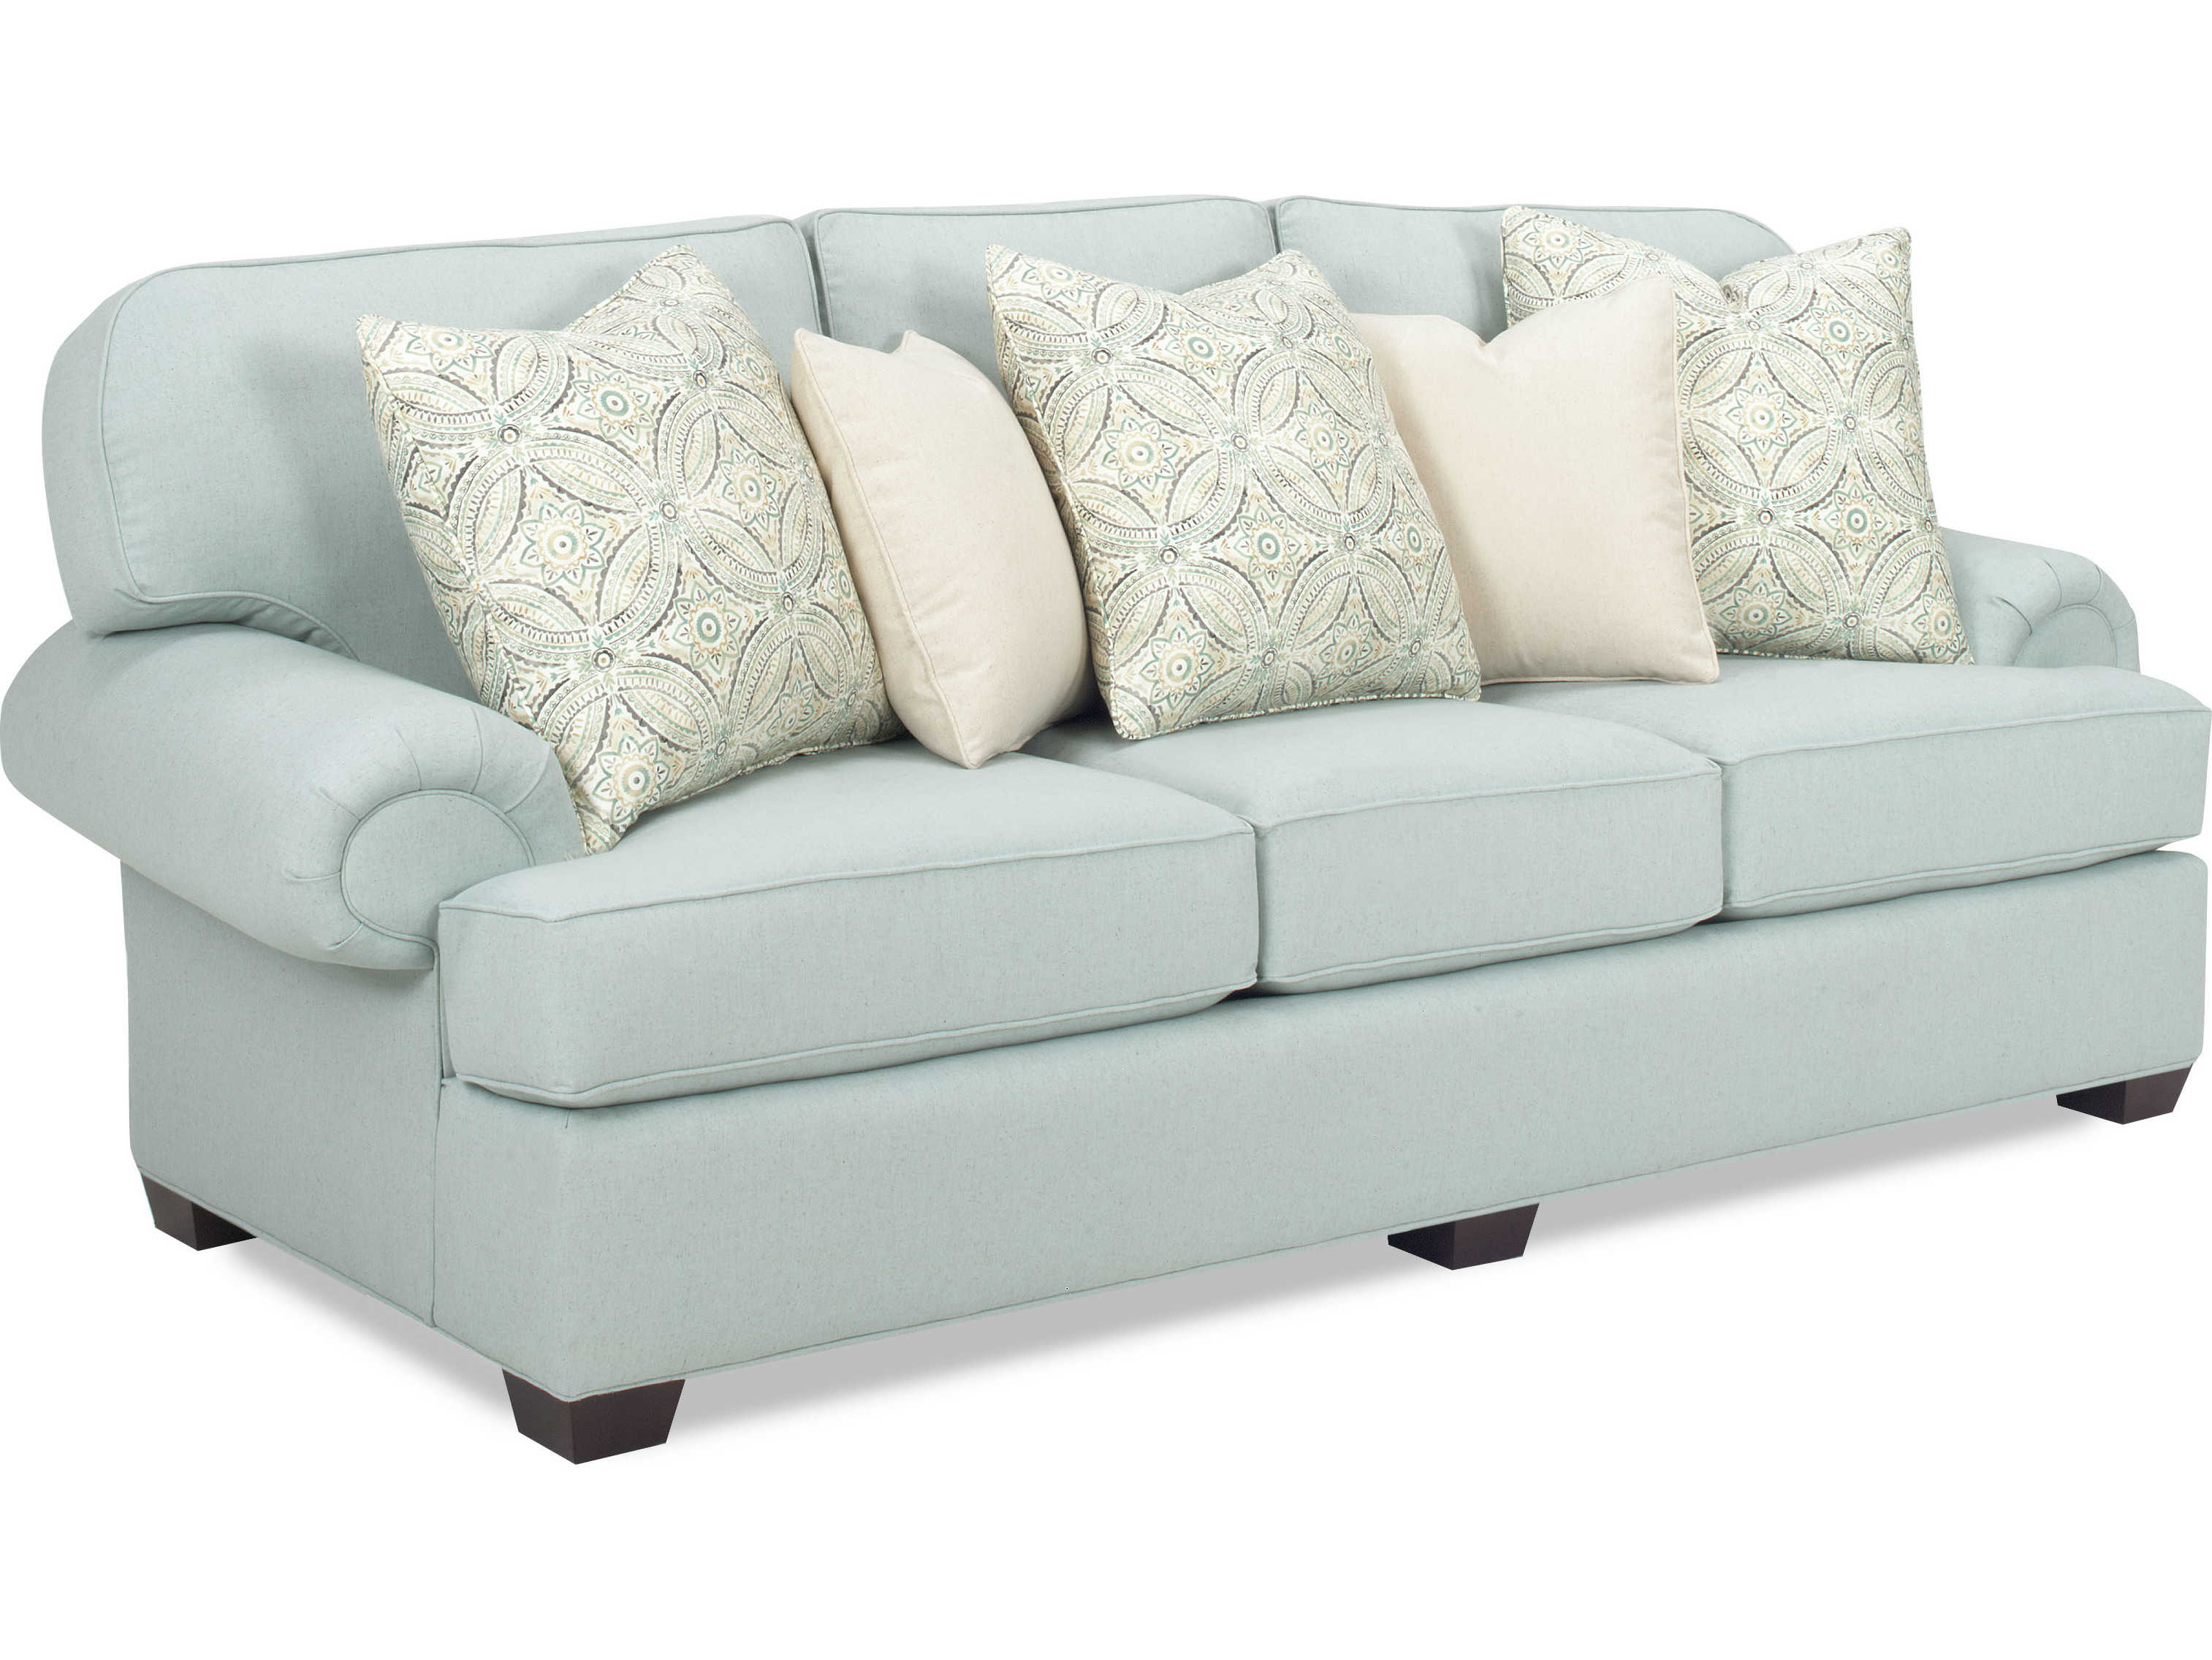 Temple Comfy Sofa Couch Tmf310097 Zm 